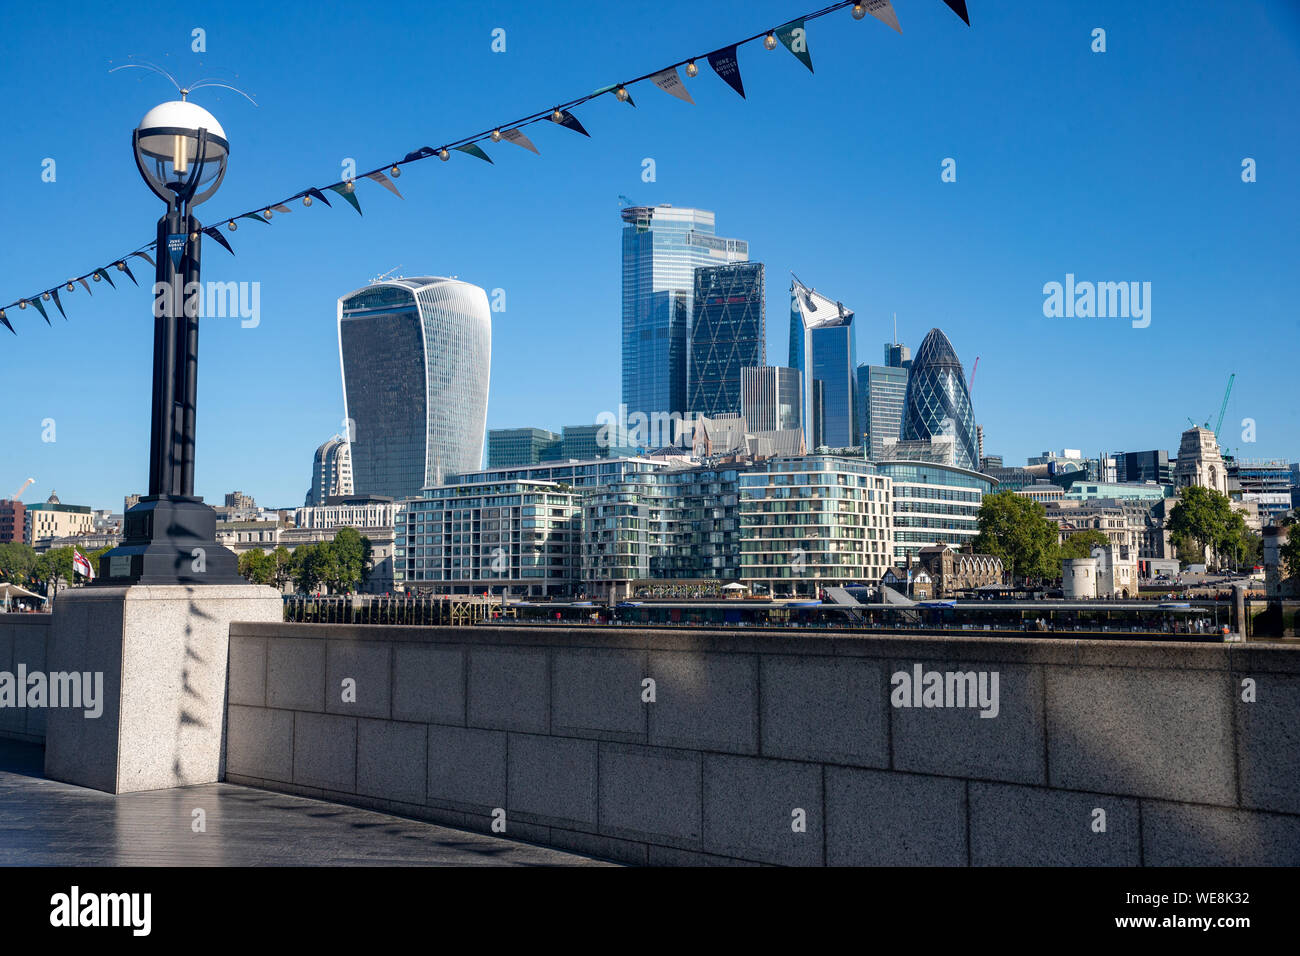 View of the City of London from the South side of the River Thames. The Gherkin, Cheesegrater and Walkie Talkie are visible in the Financial section. Stock Photo